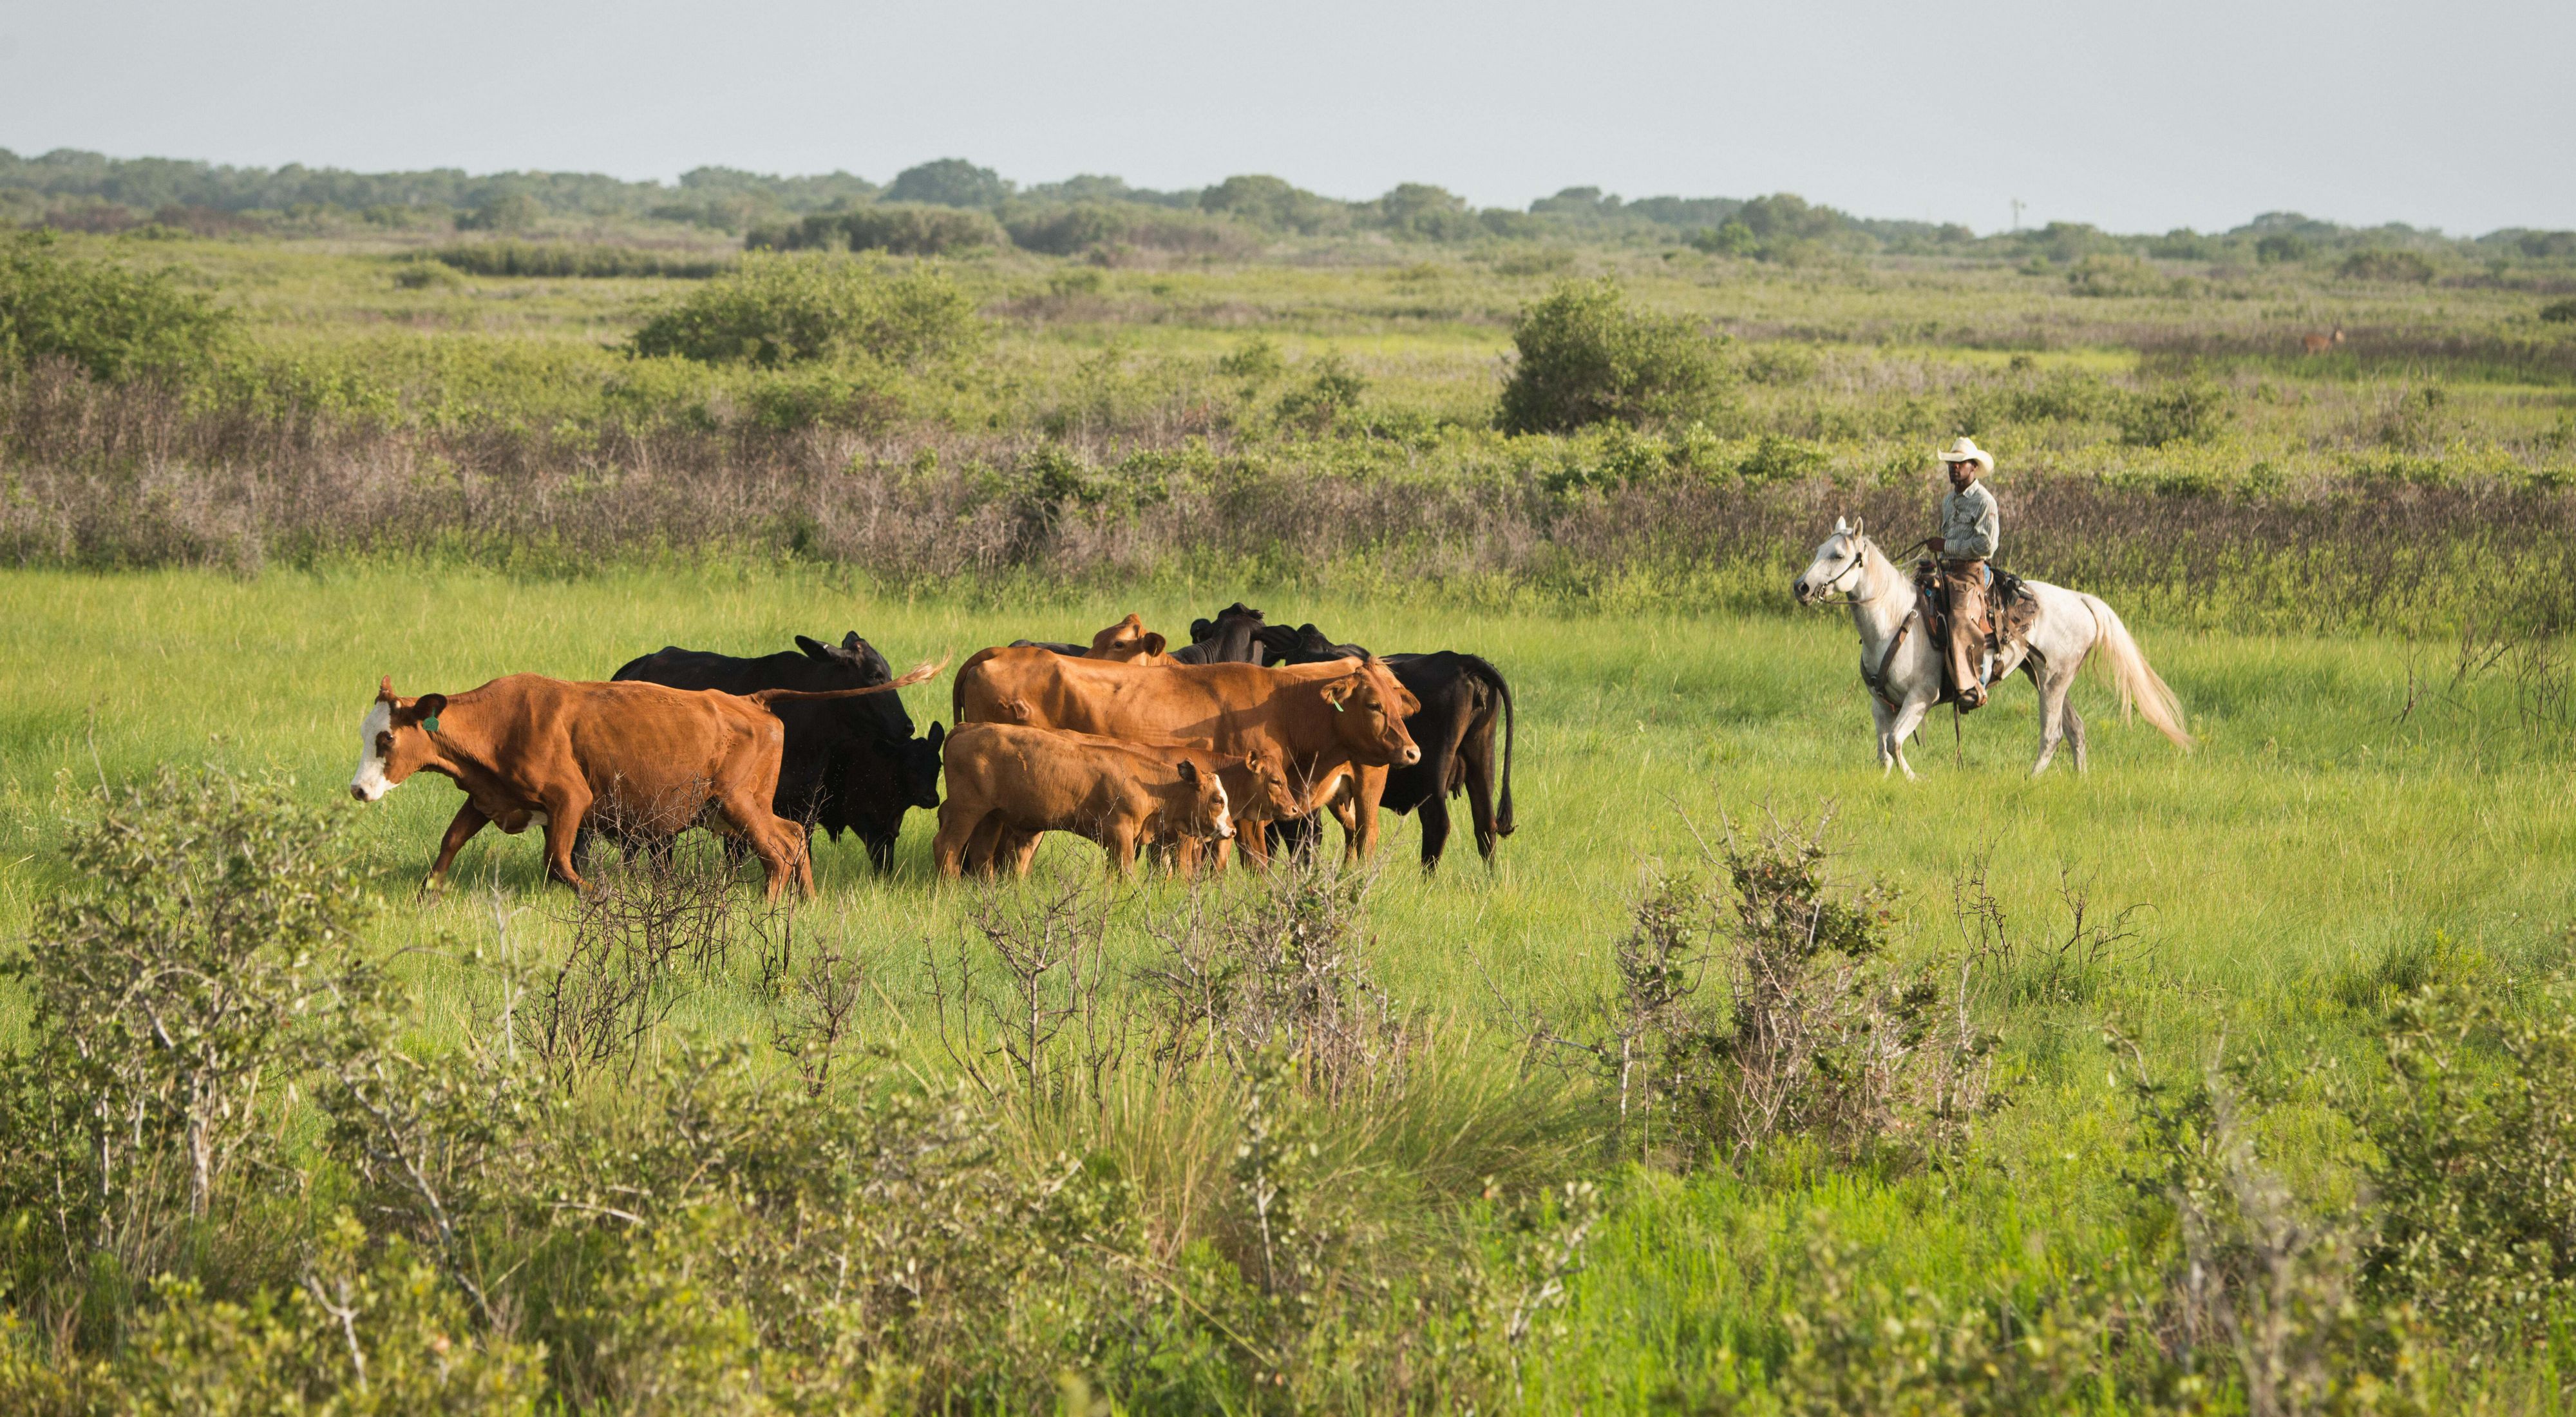 A man wearing a cowboy hat rides a white horse, herding a group of cattle through a grassy pasture.